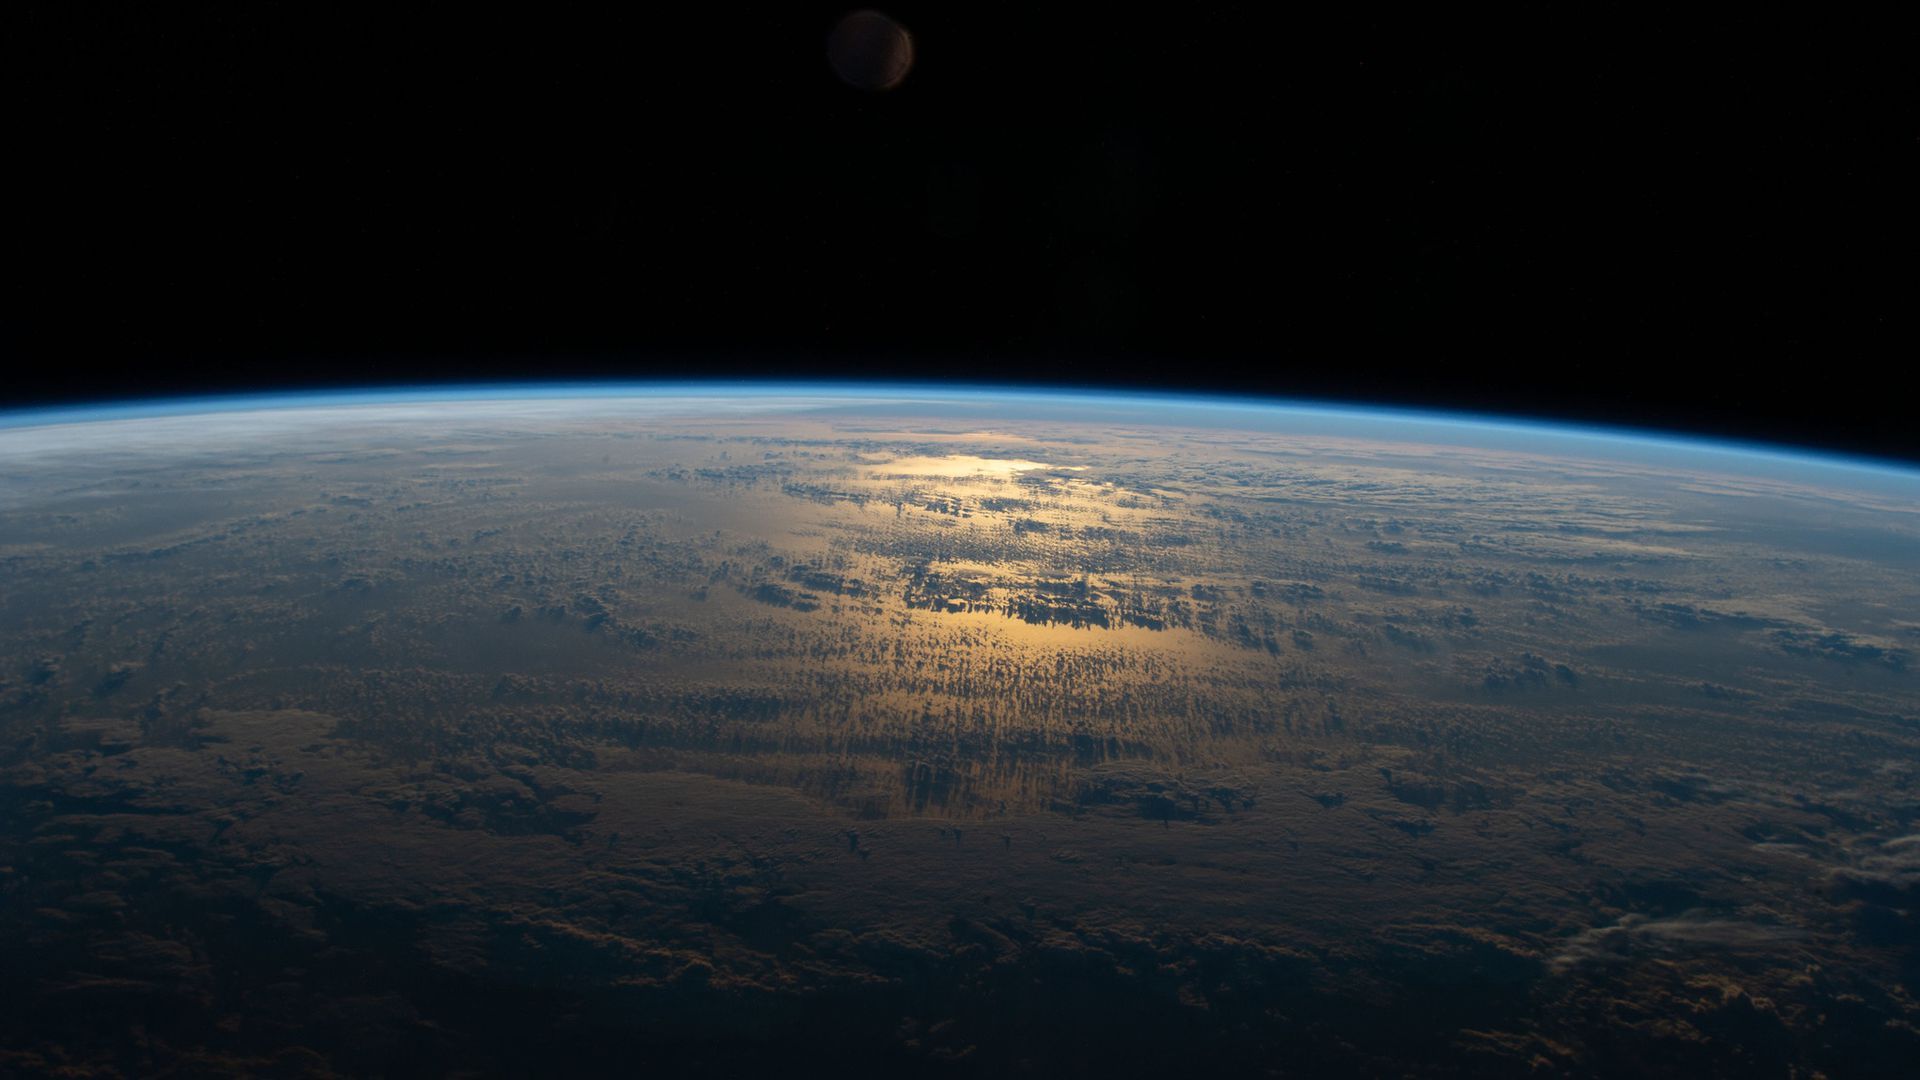 A picture of the earth from space